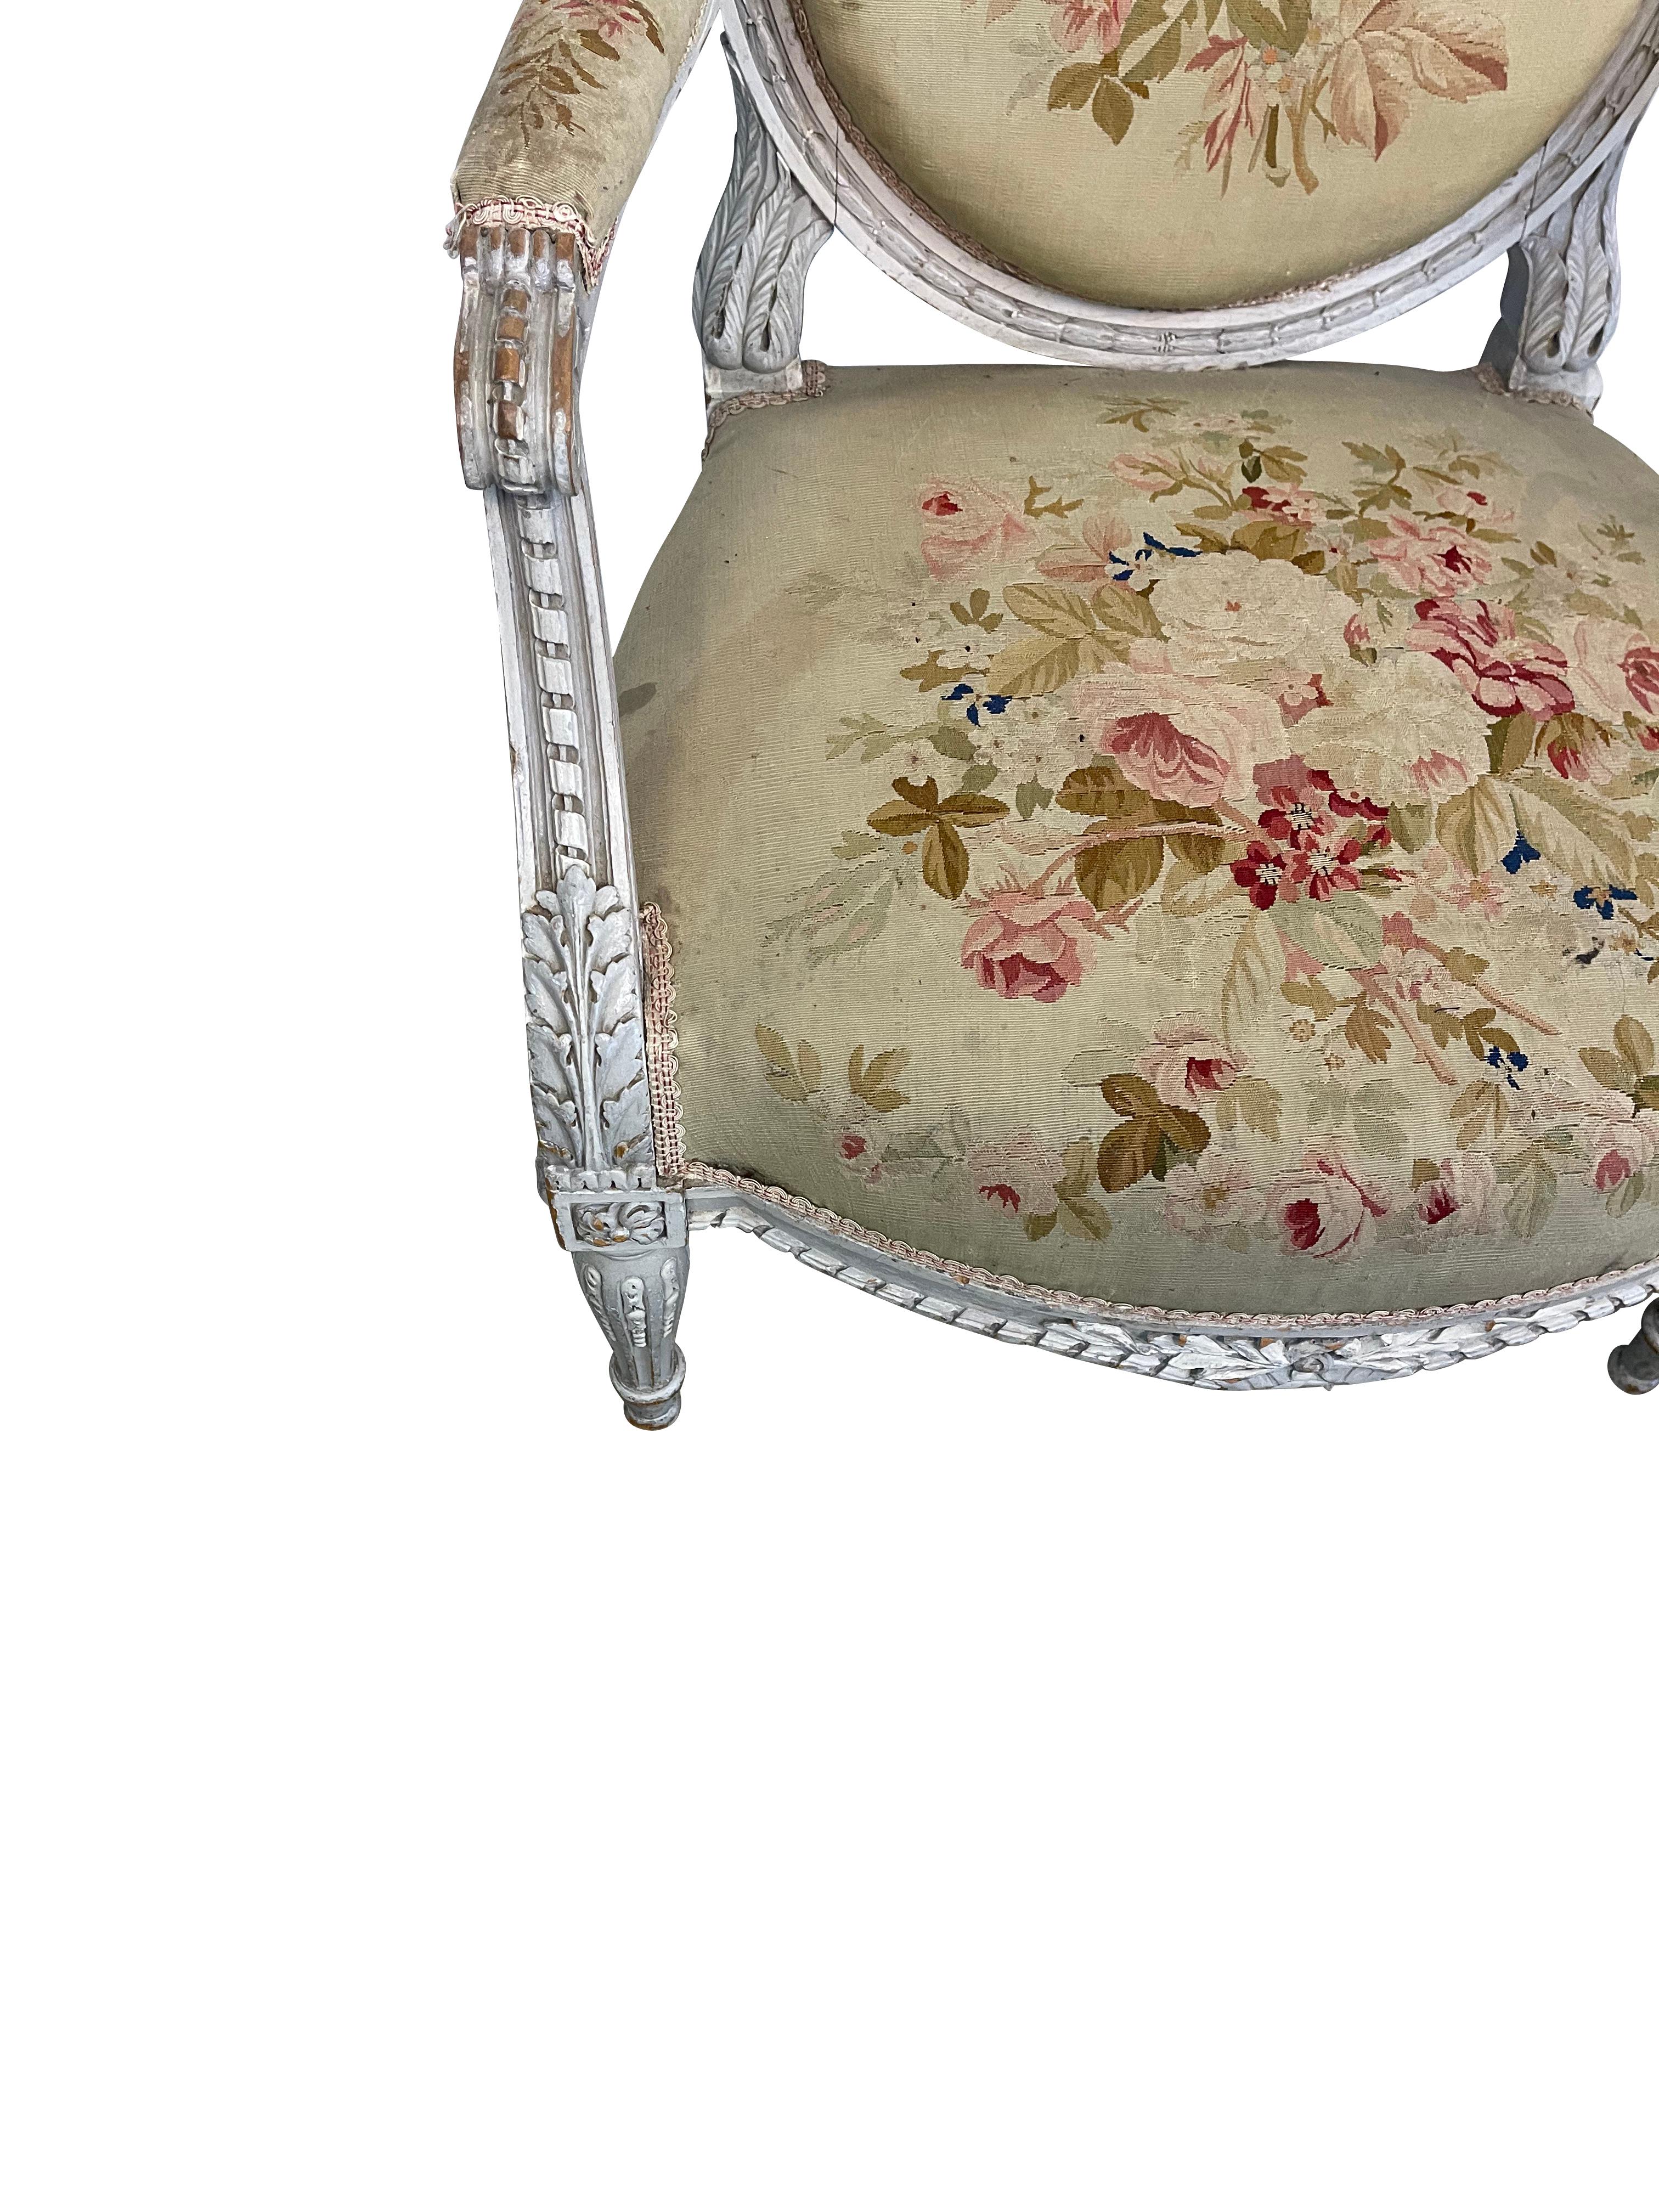 Lovely original carved Louis XVI style chairs with original Aubusson tapestry upholstery. A pair of Louis XVI style fauteuils or armchairis in their original condition ready to be reupholstered .  They ate extemely sturdy and have very beautiful